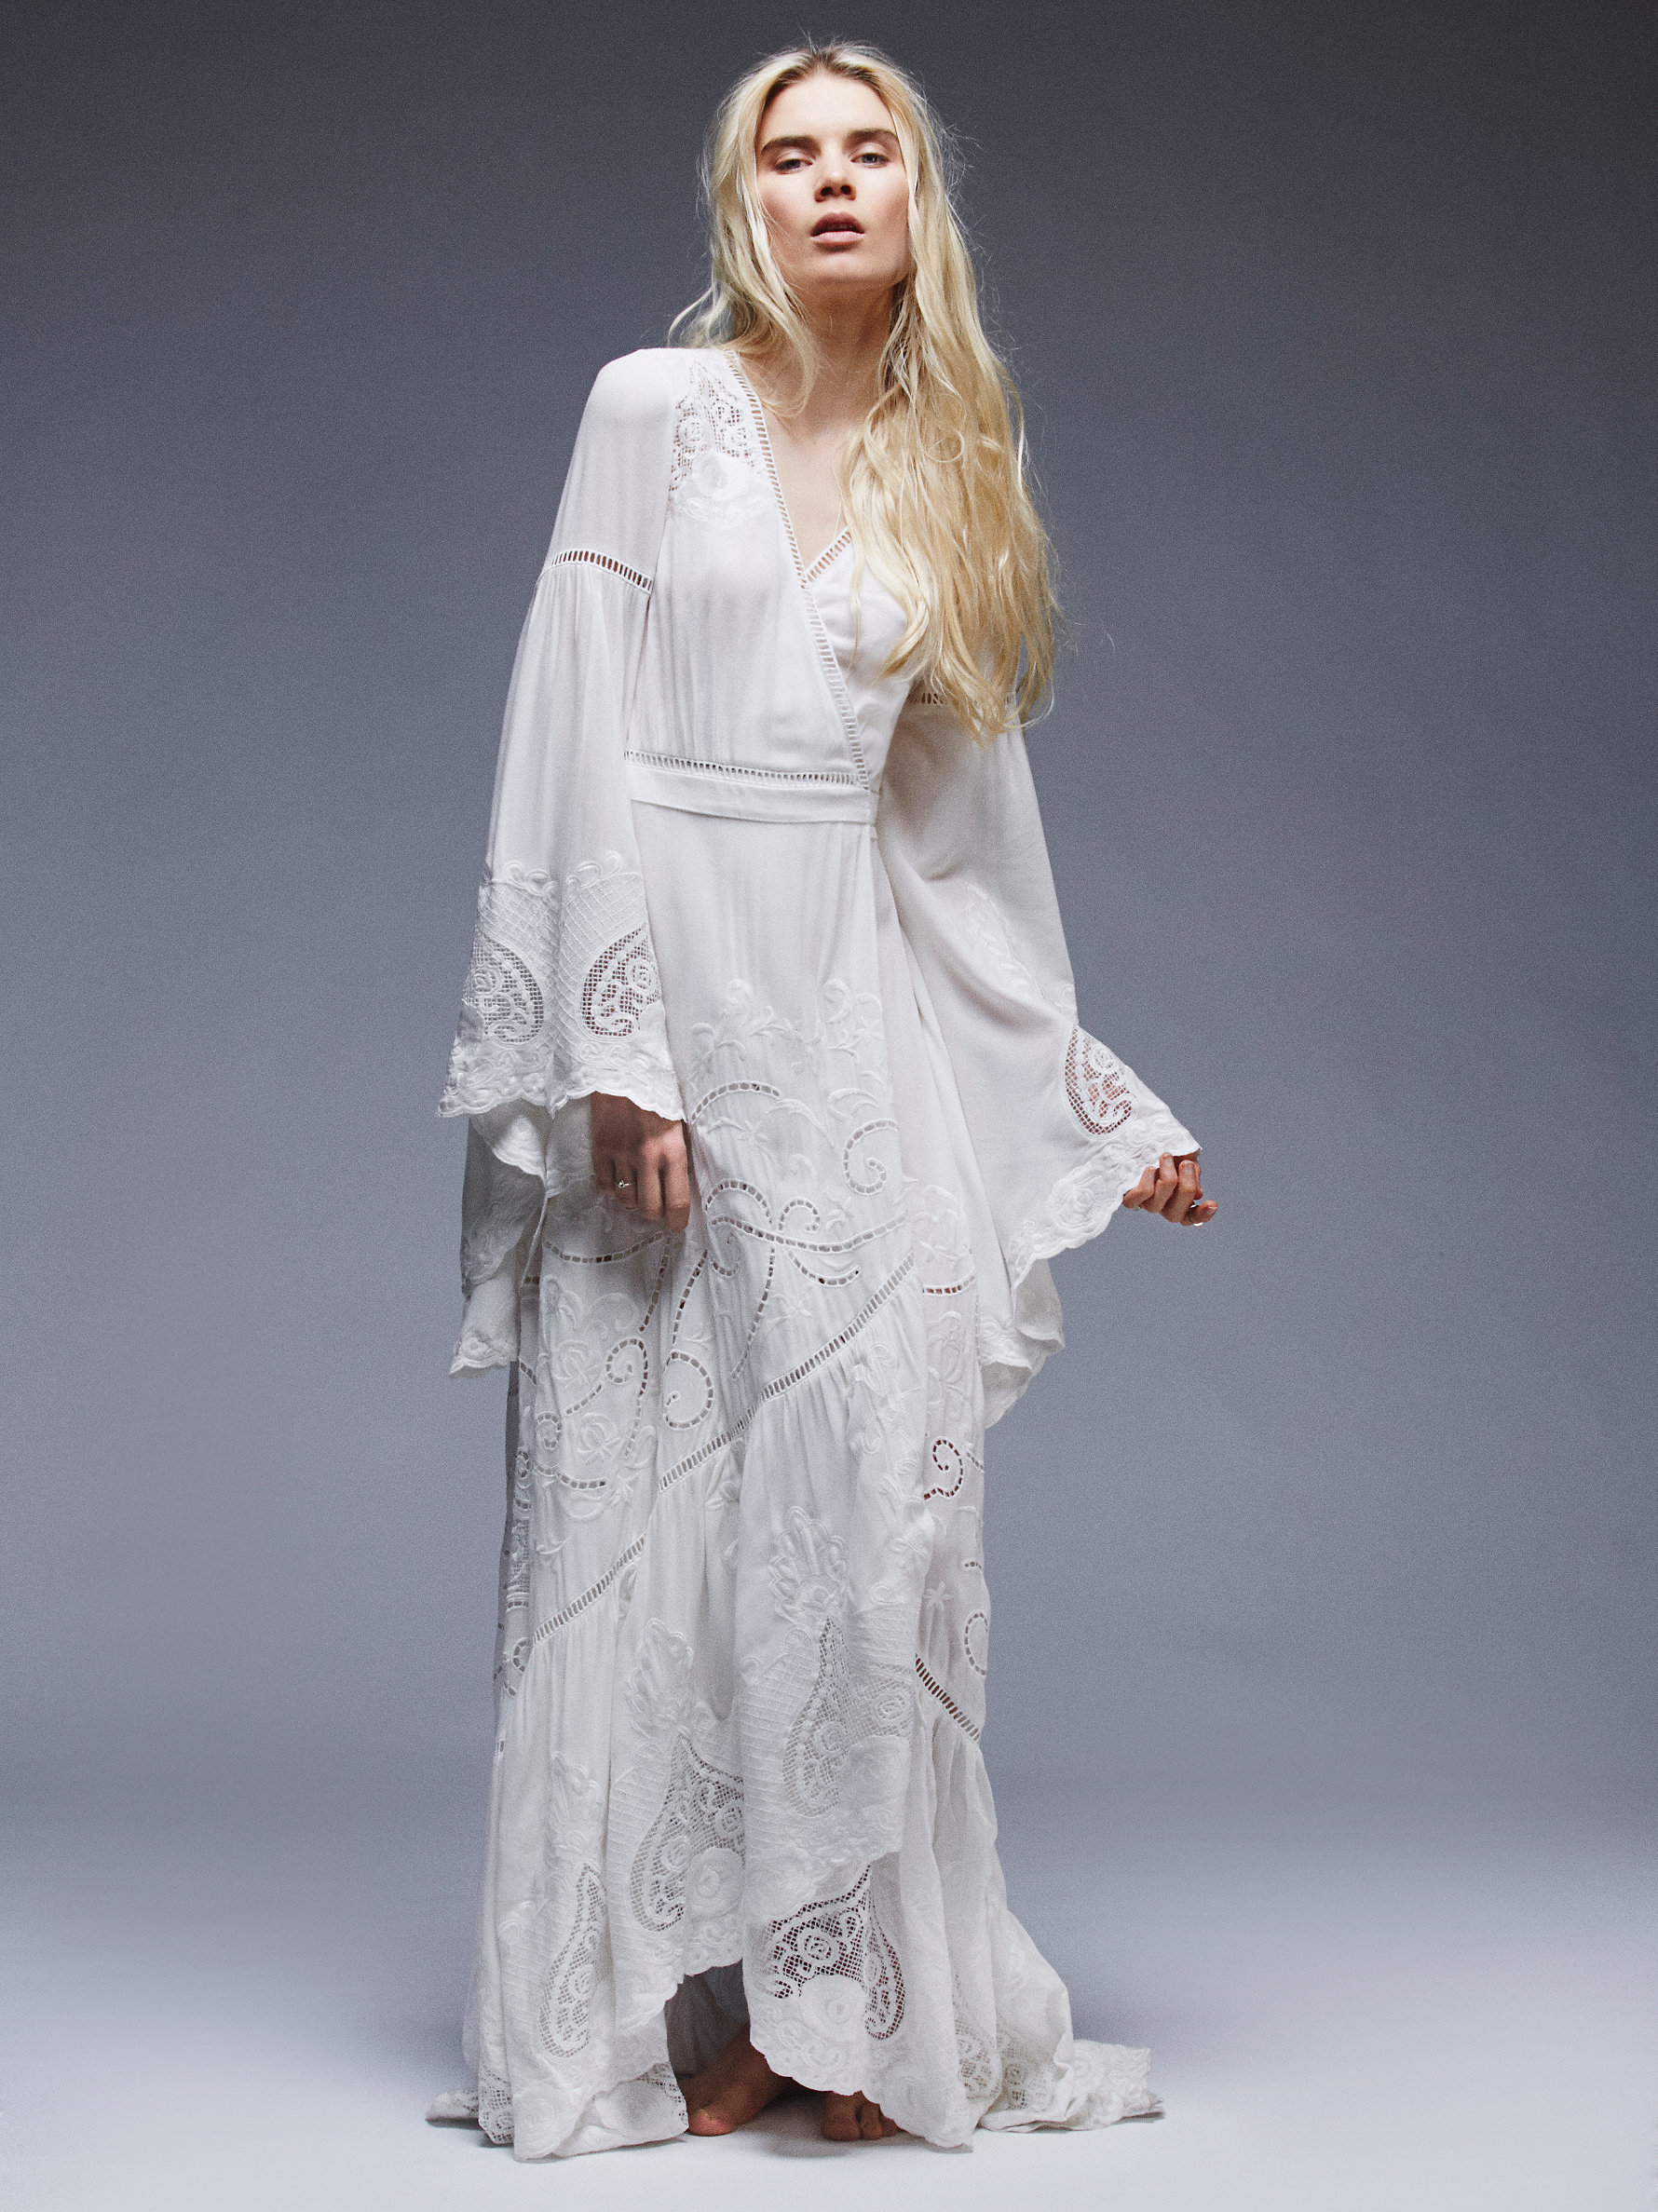 Lyst Free People Gwendolyn Wrap  Gown in White 